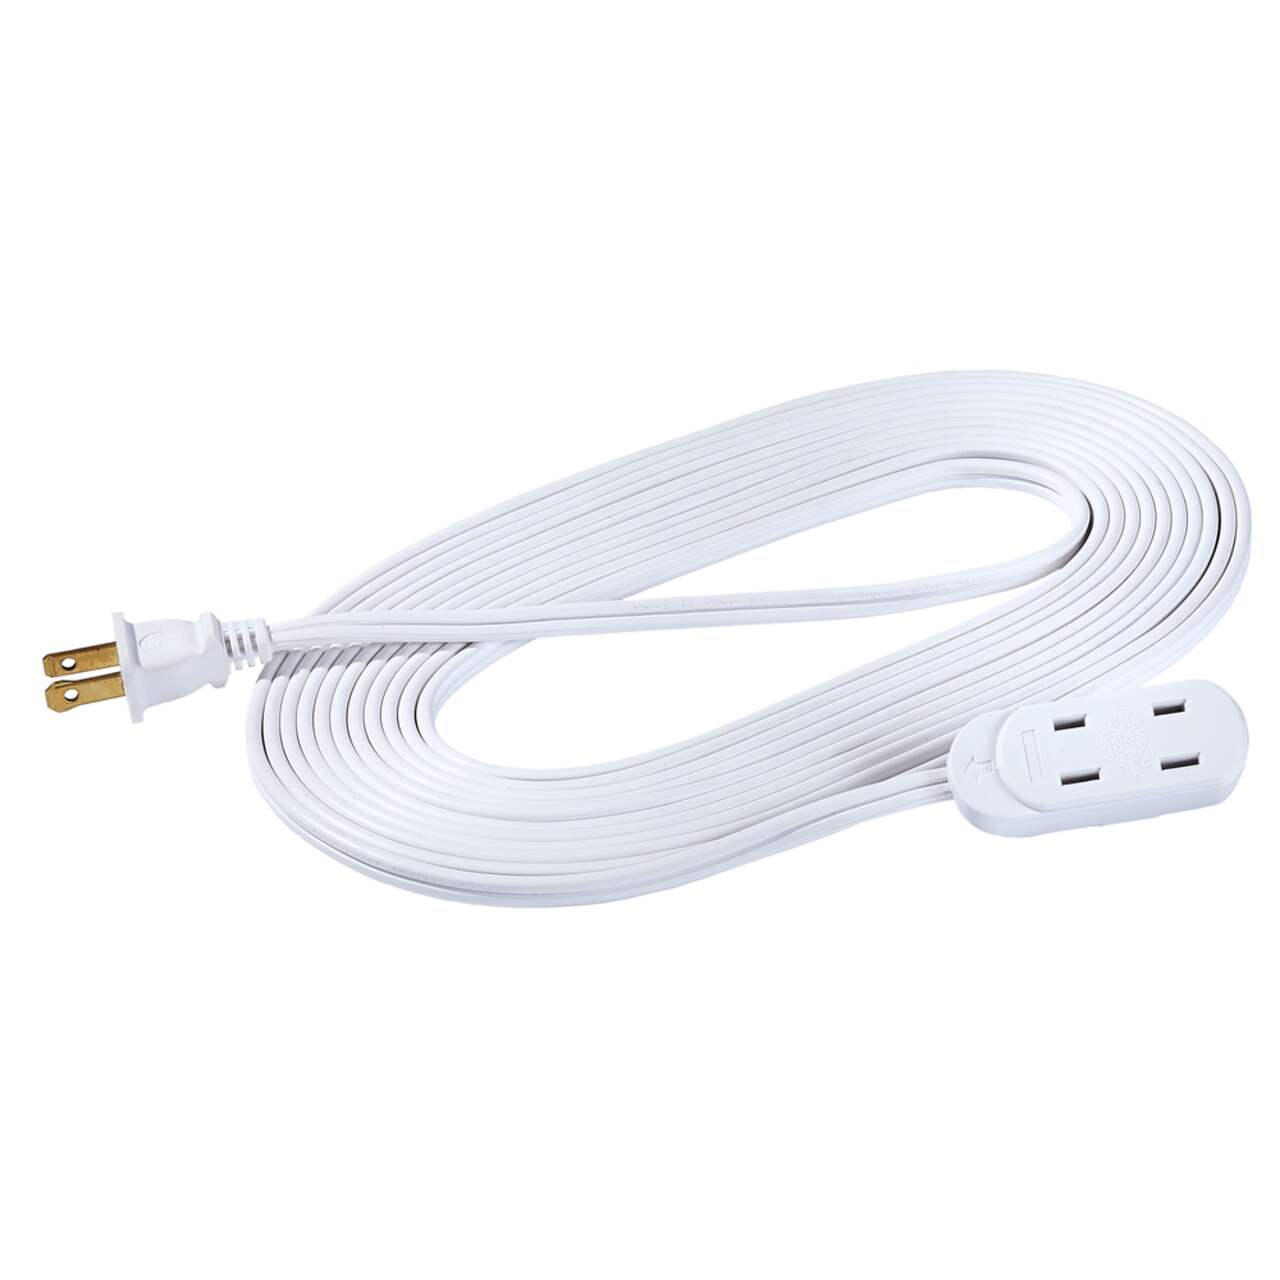 NOMA 20-ft 16/2 Indoor Extension Cord, 3 Outlets with Safety Cover, White